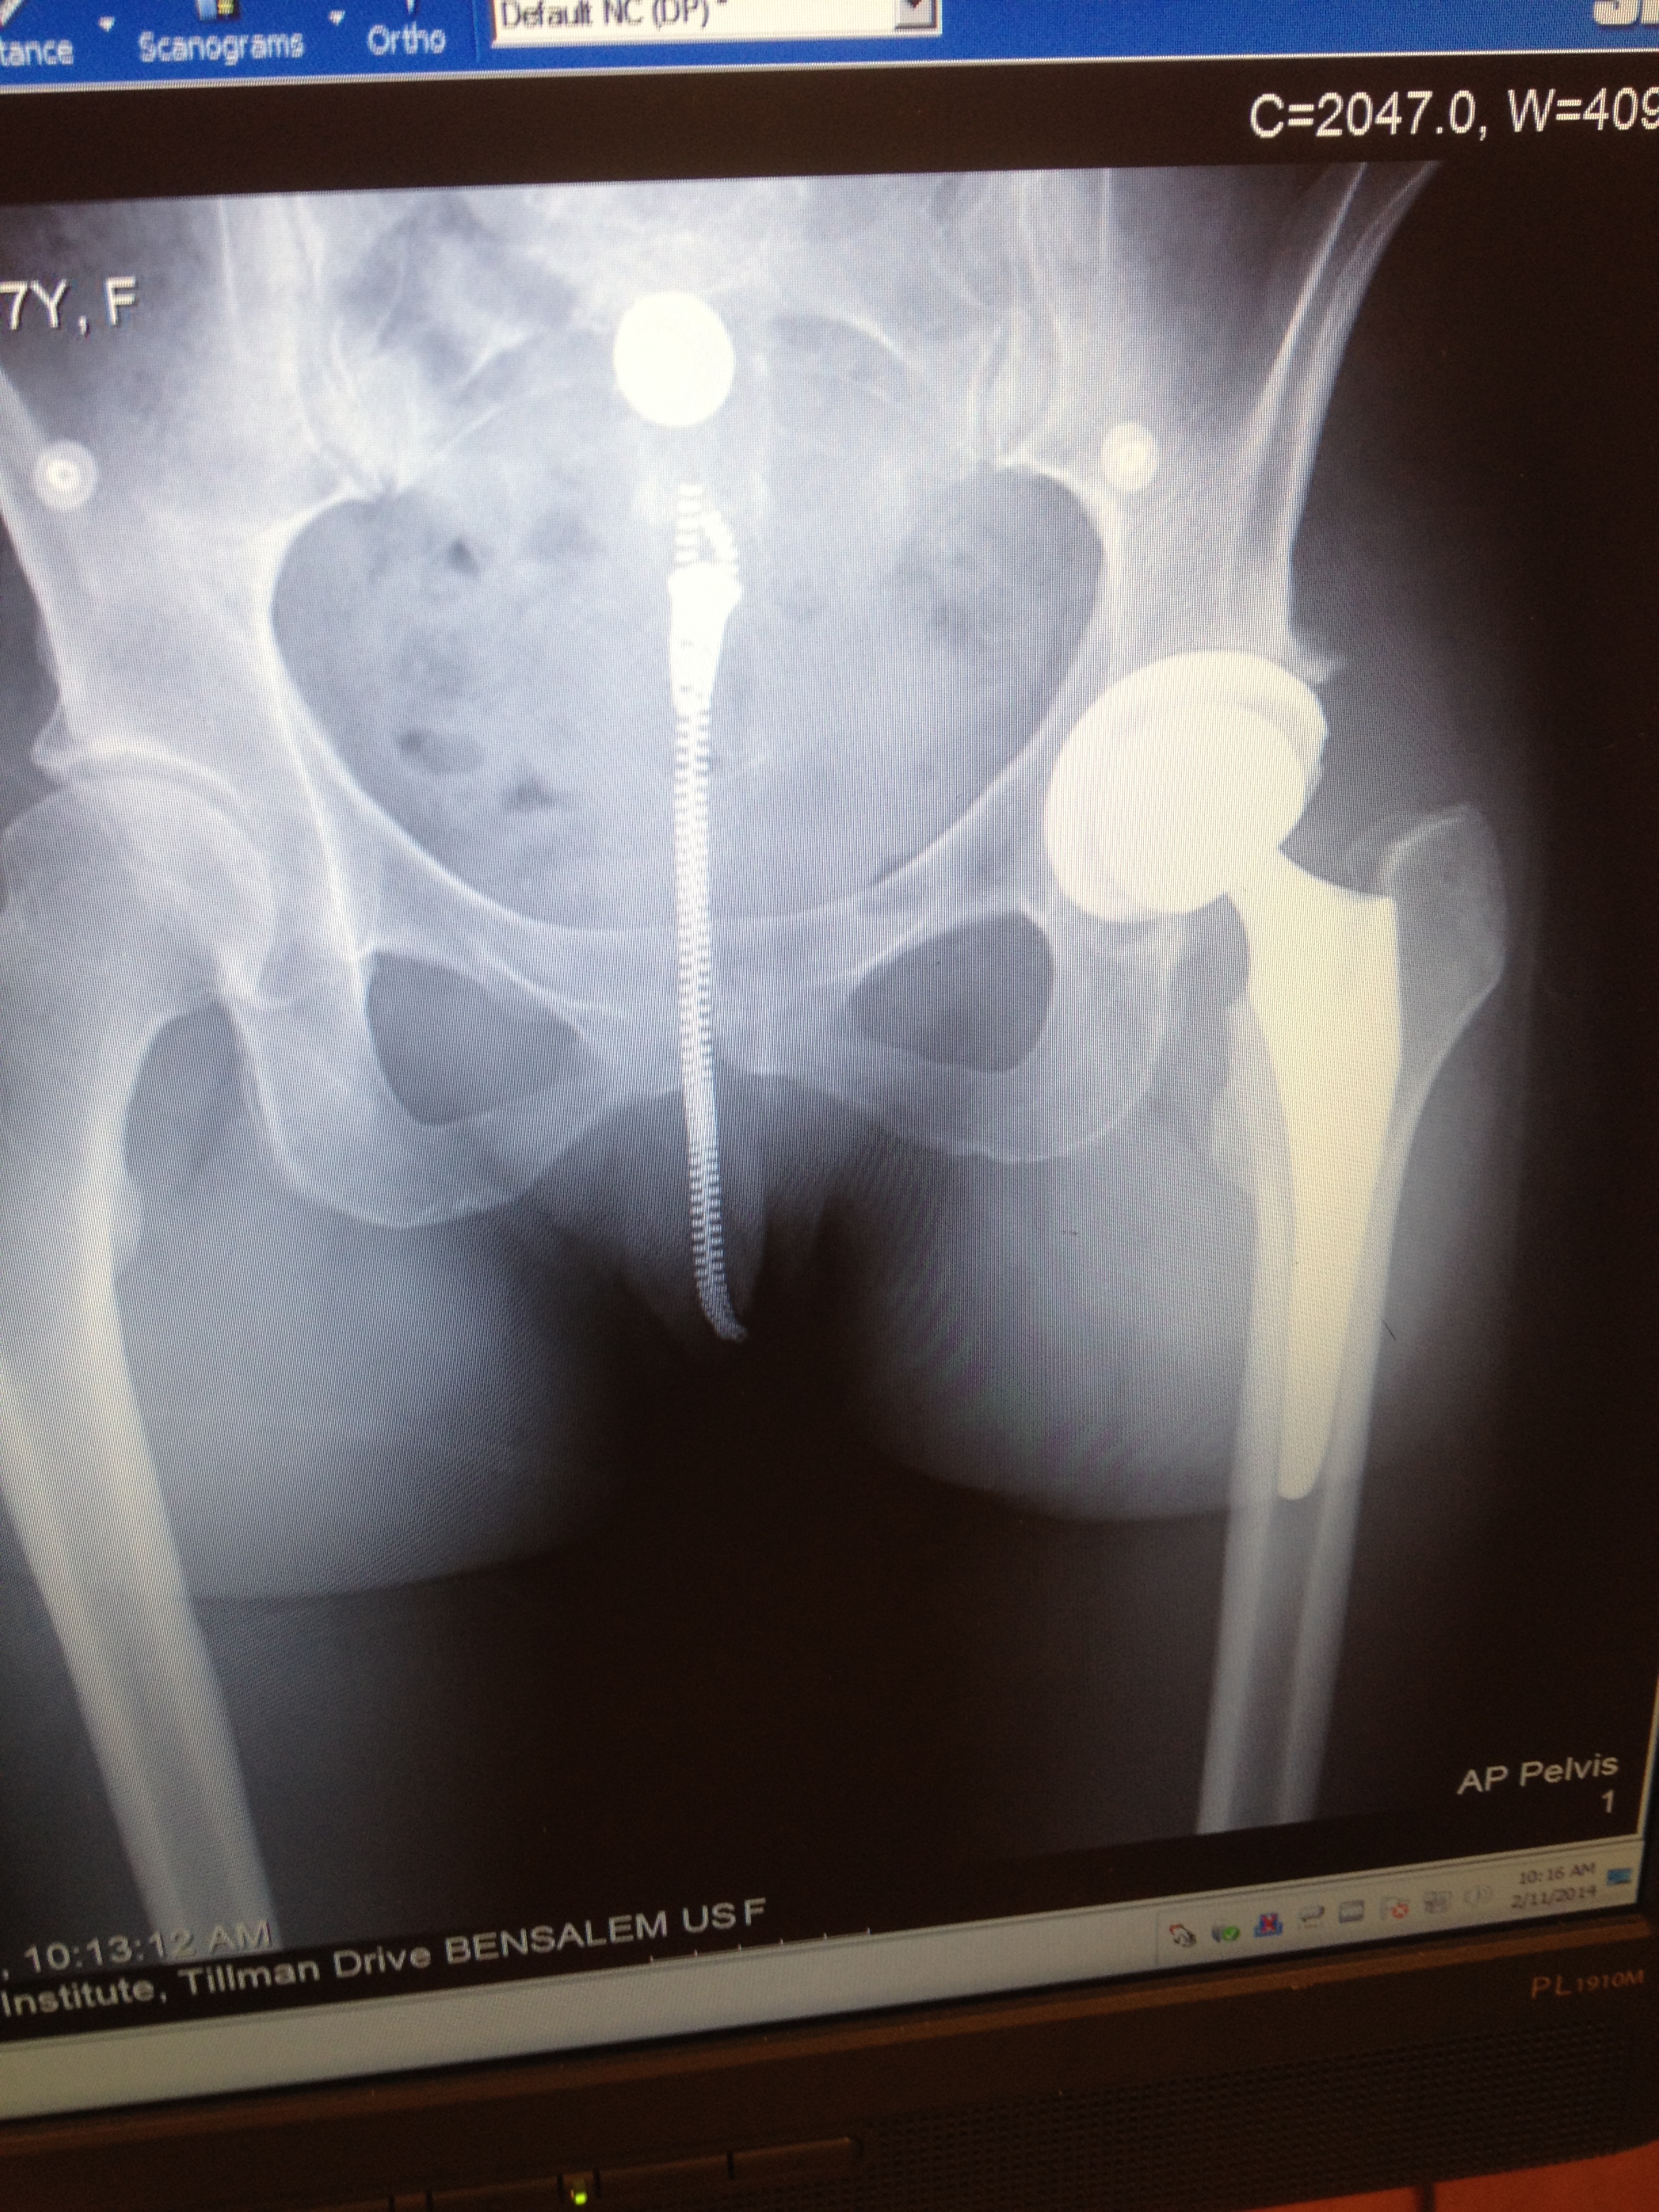 This is my post op X-ray of the hip replacement surgery.  Healing well!